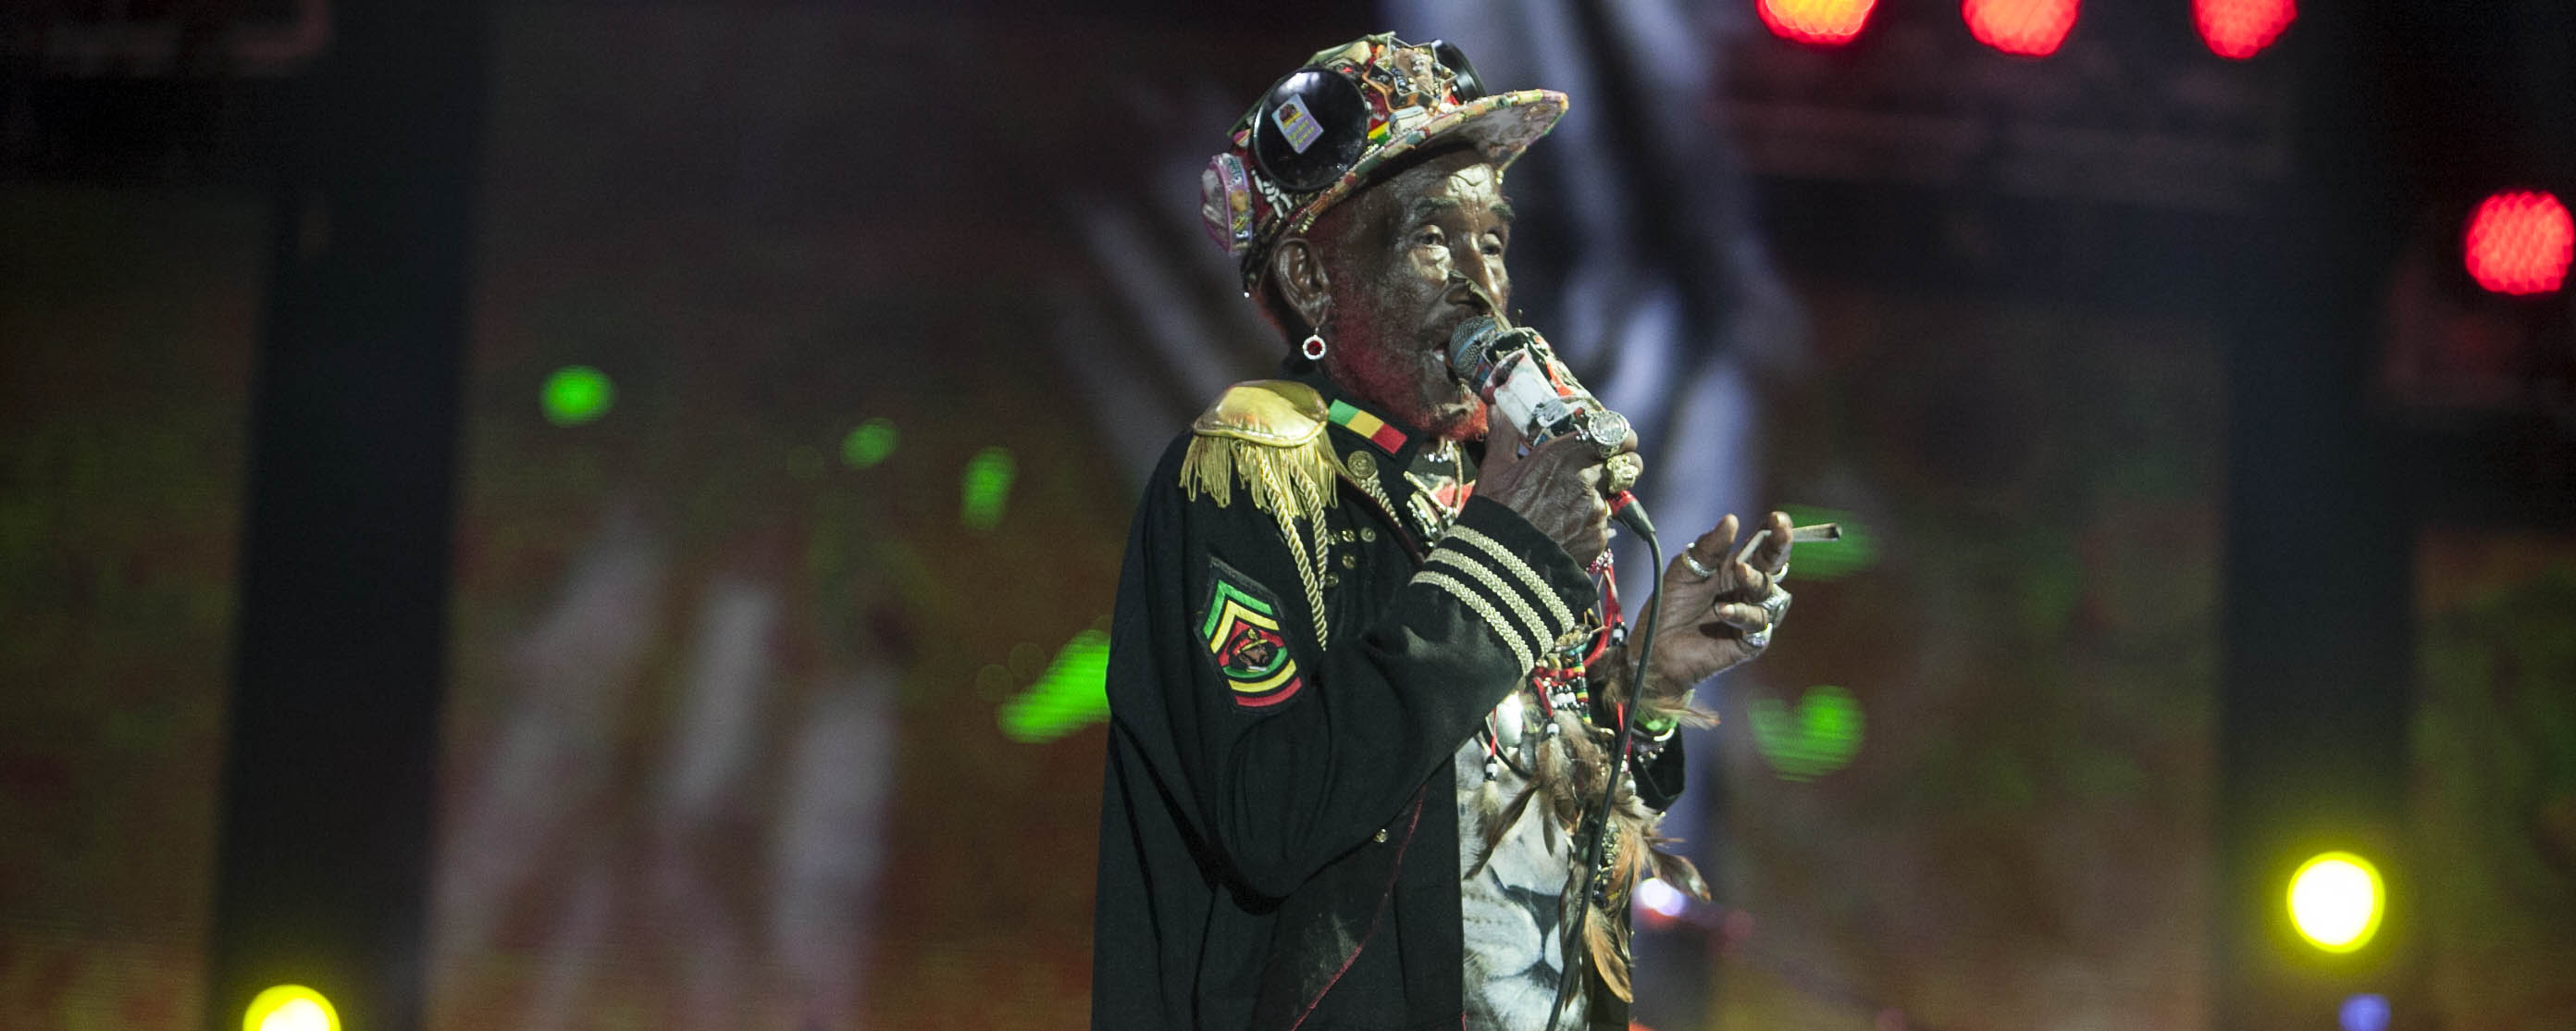 Lee Scratch Perry @ High Vibes 2016 - Negril Jamaica